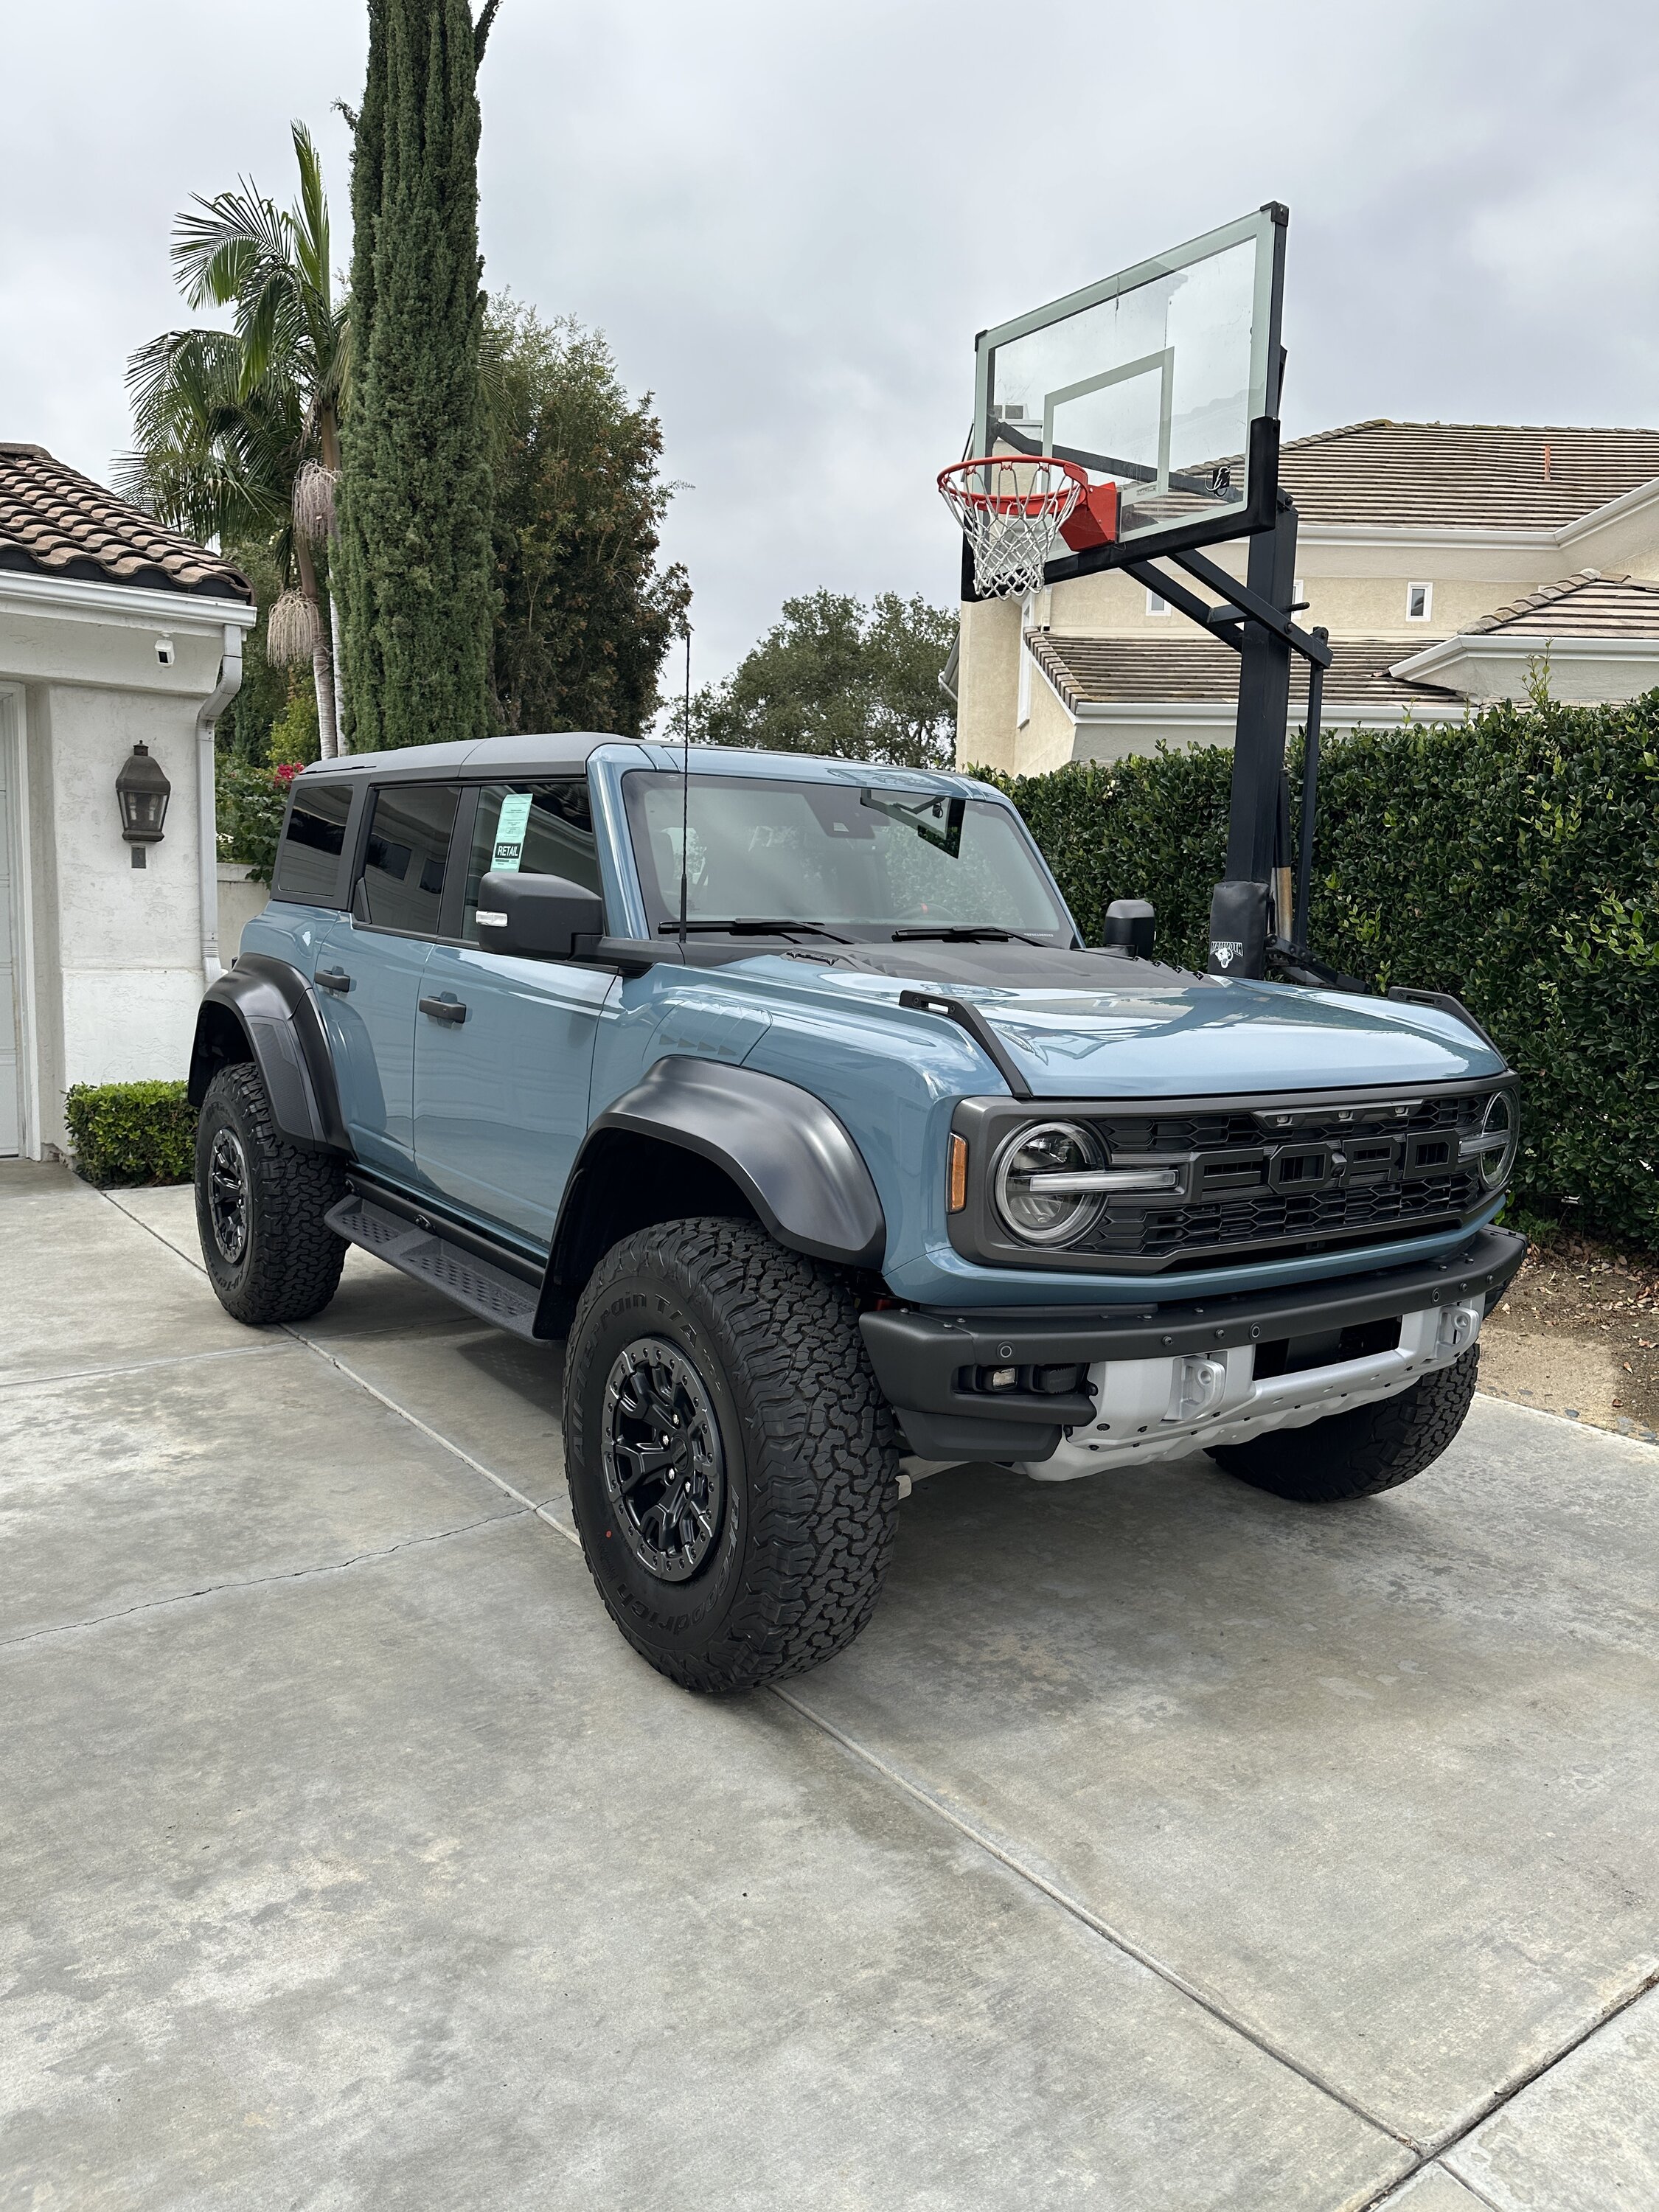 Ford Bronco Took delivery of my Area 51 Bronco Raptor - 80/20 on looks but 100% on performance 92CD160C-8D05-422B-A665-F798DA1F202D